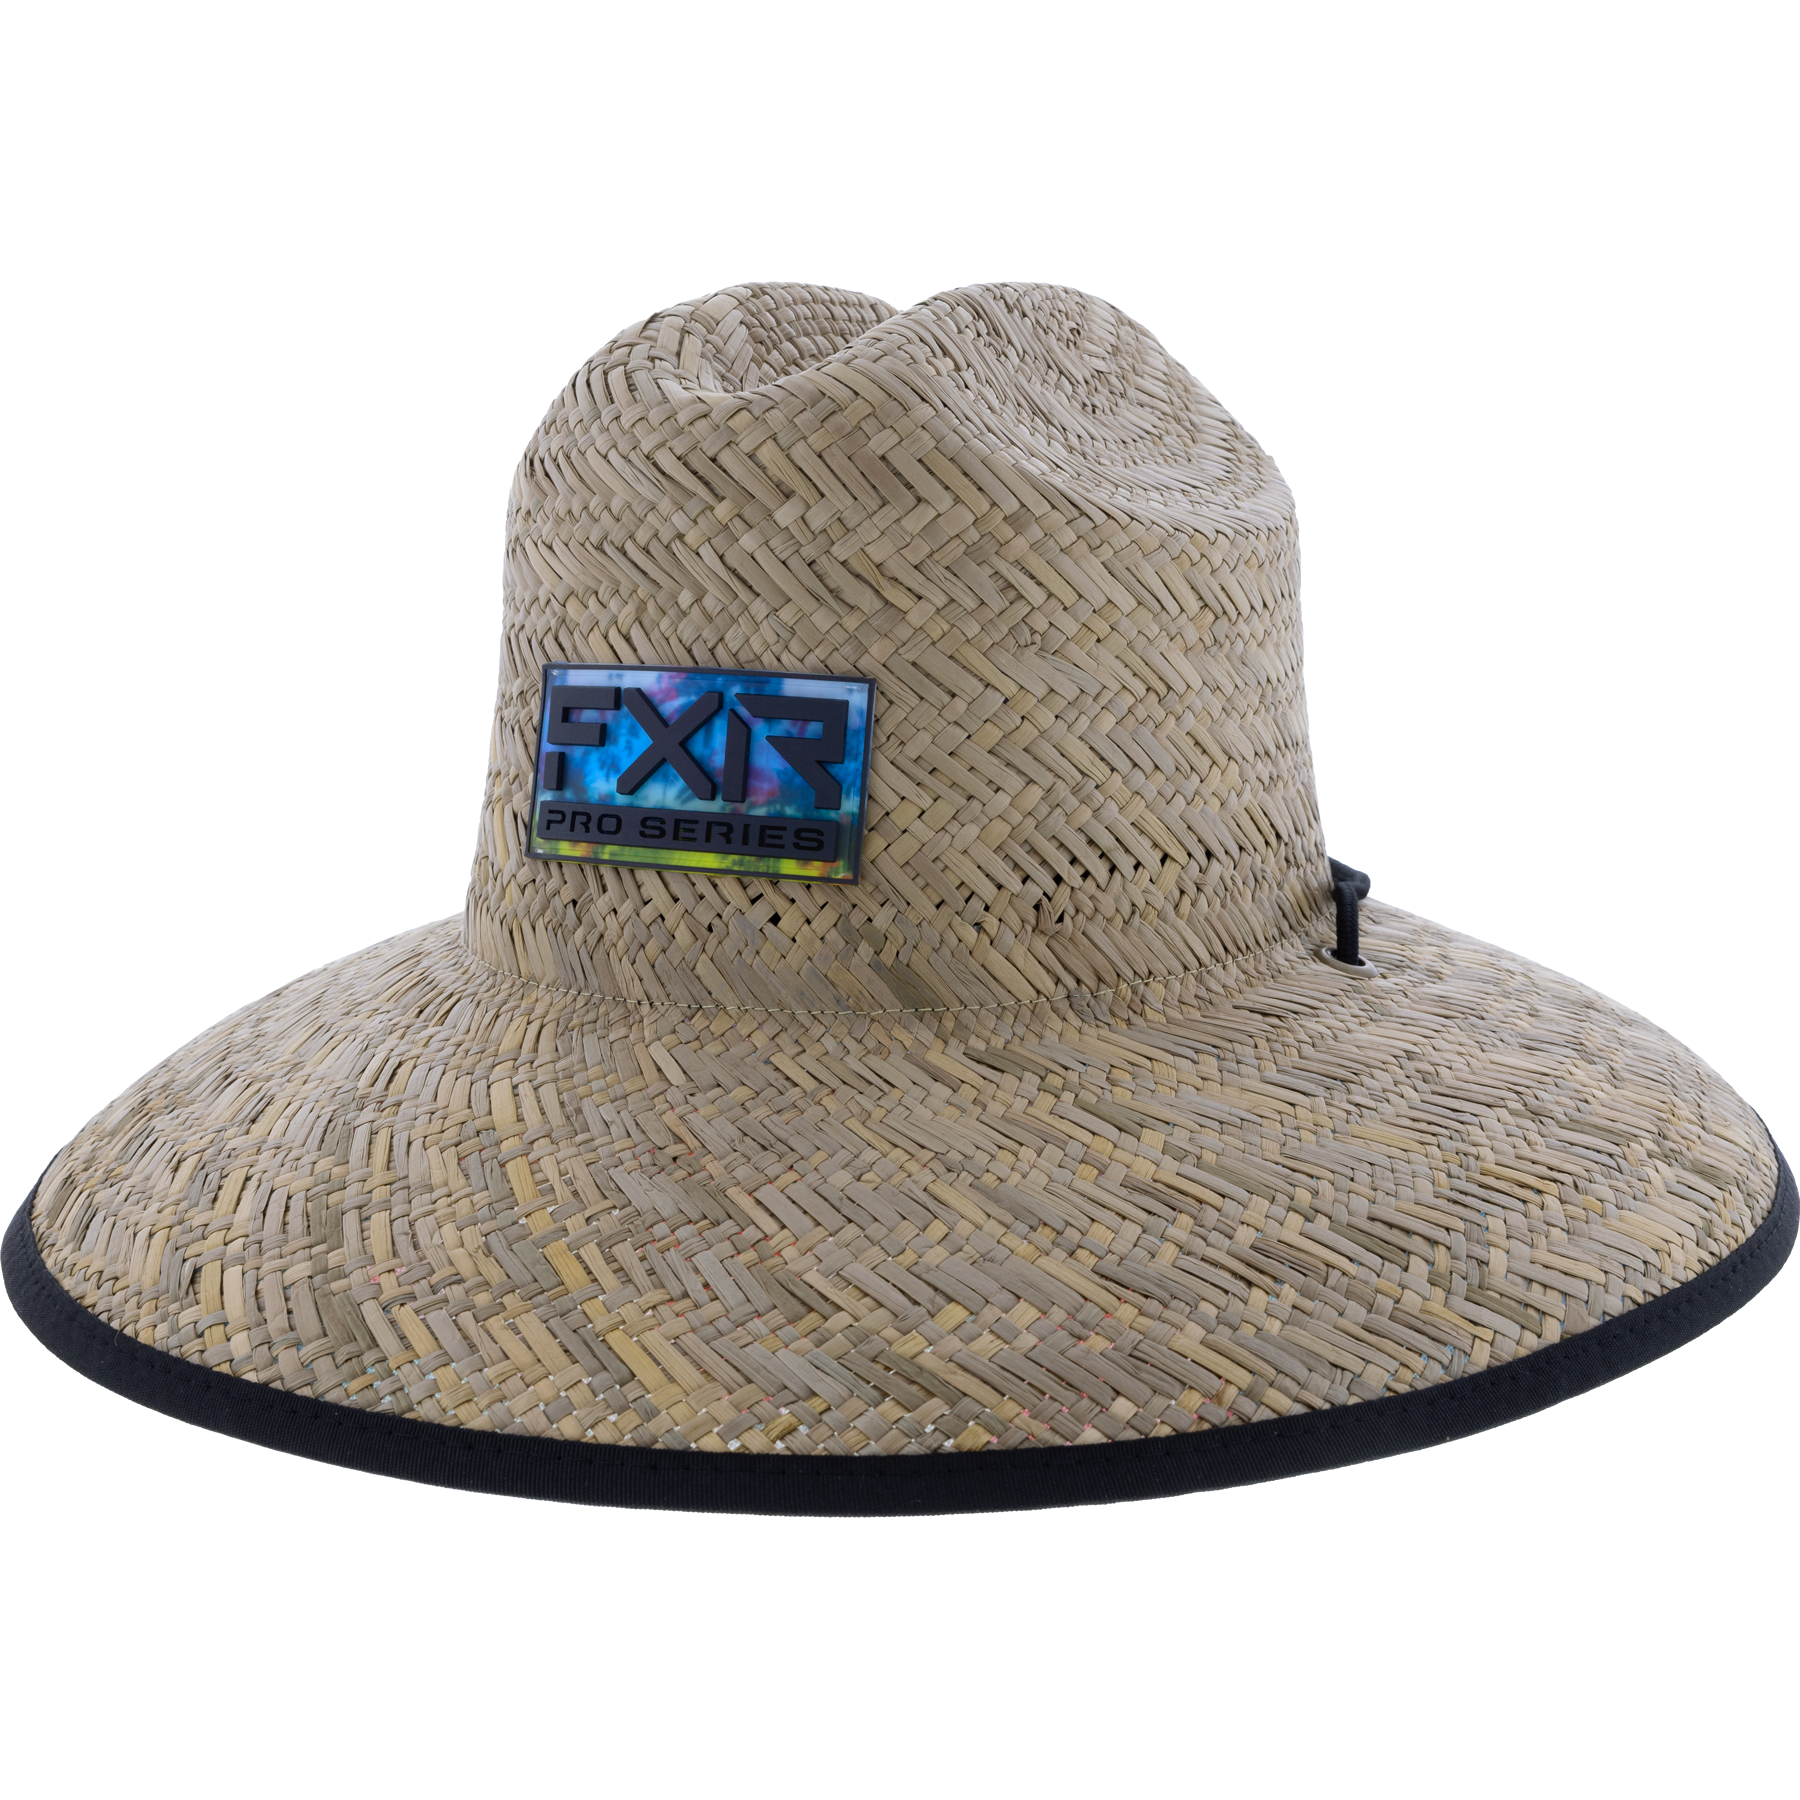 fxr racing hats  shoreside straw hats - casual